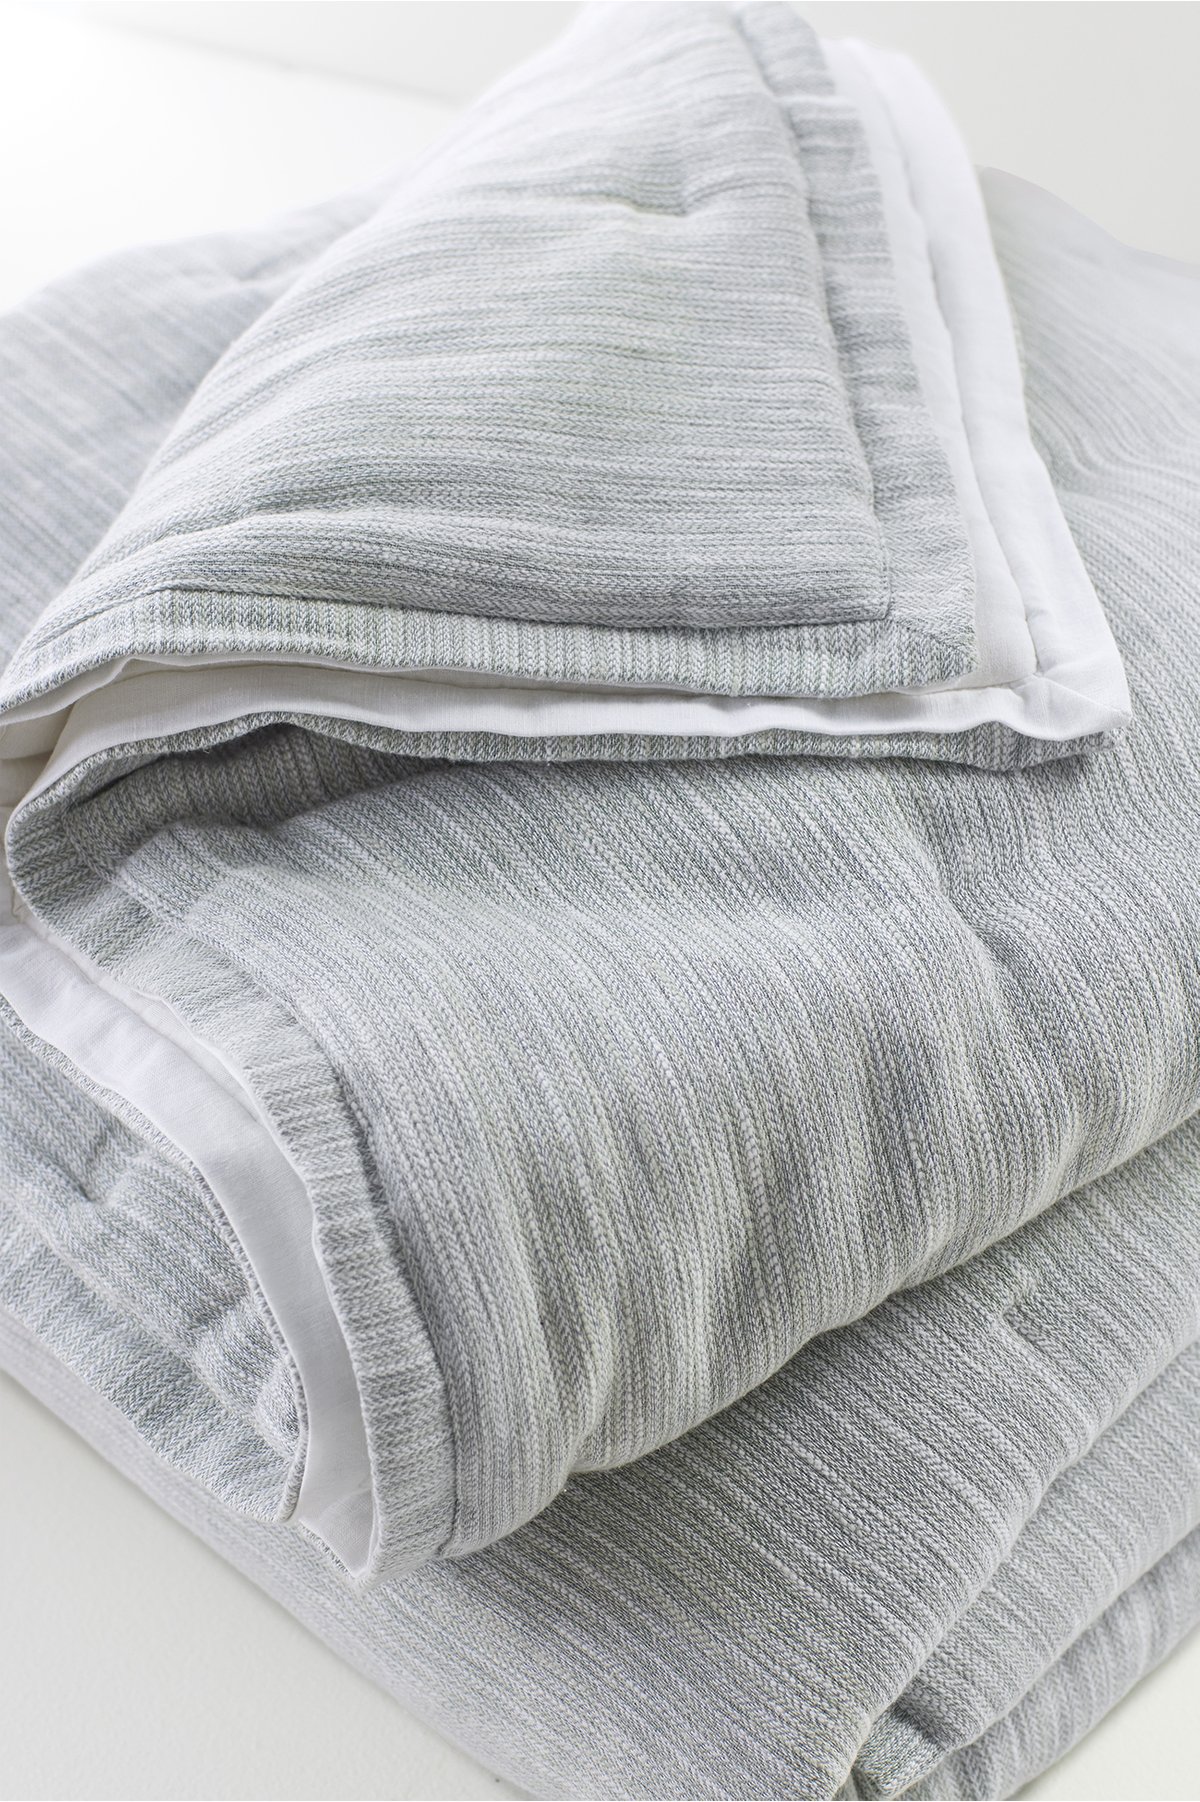 Evie Textured Comforter by Soft Surroundings, in Silver Sea size Queen